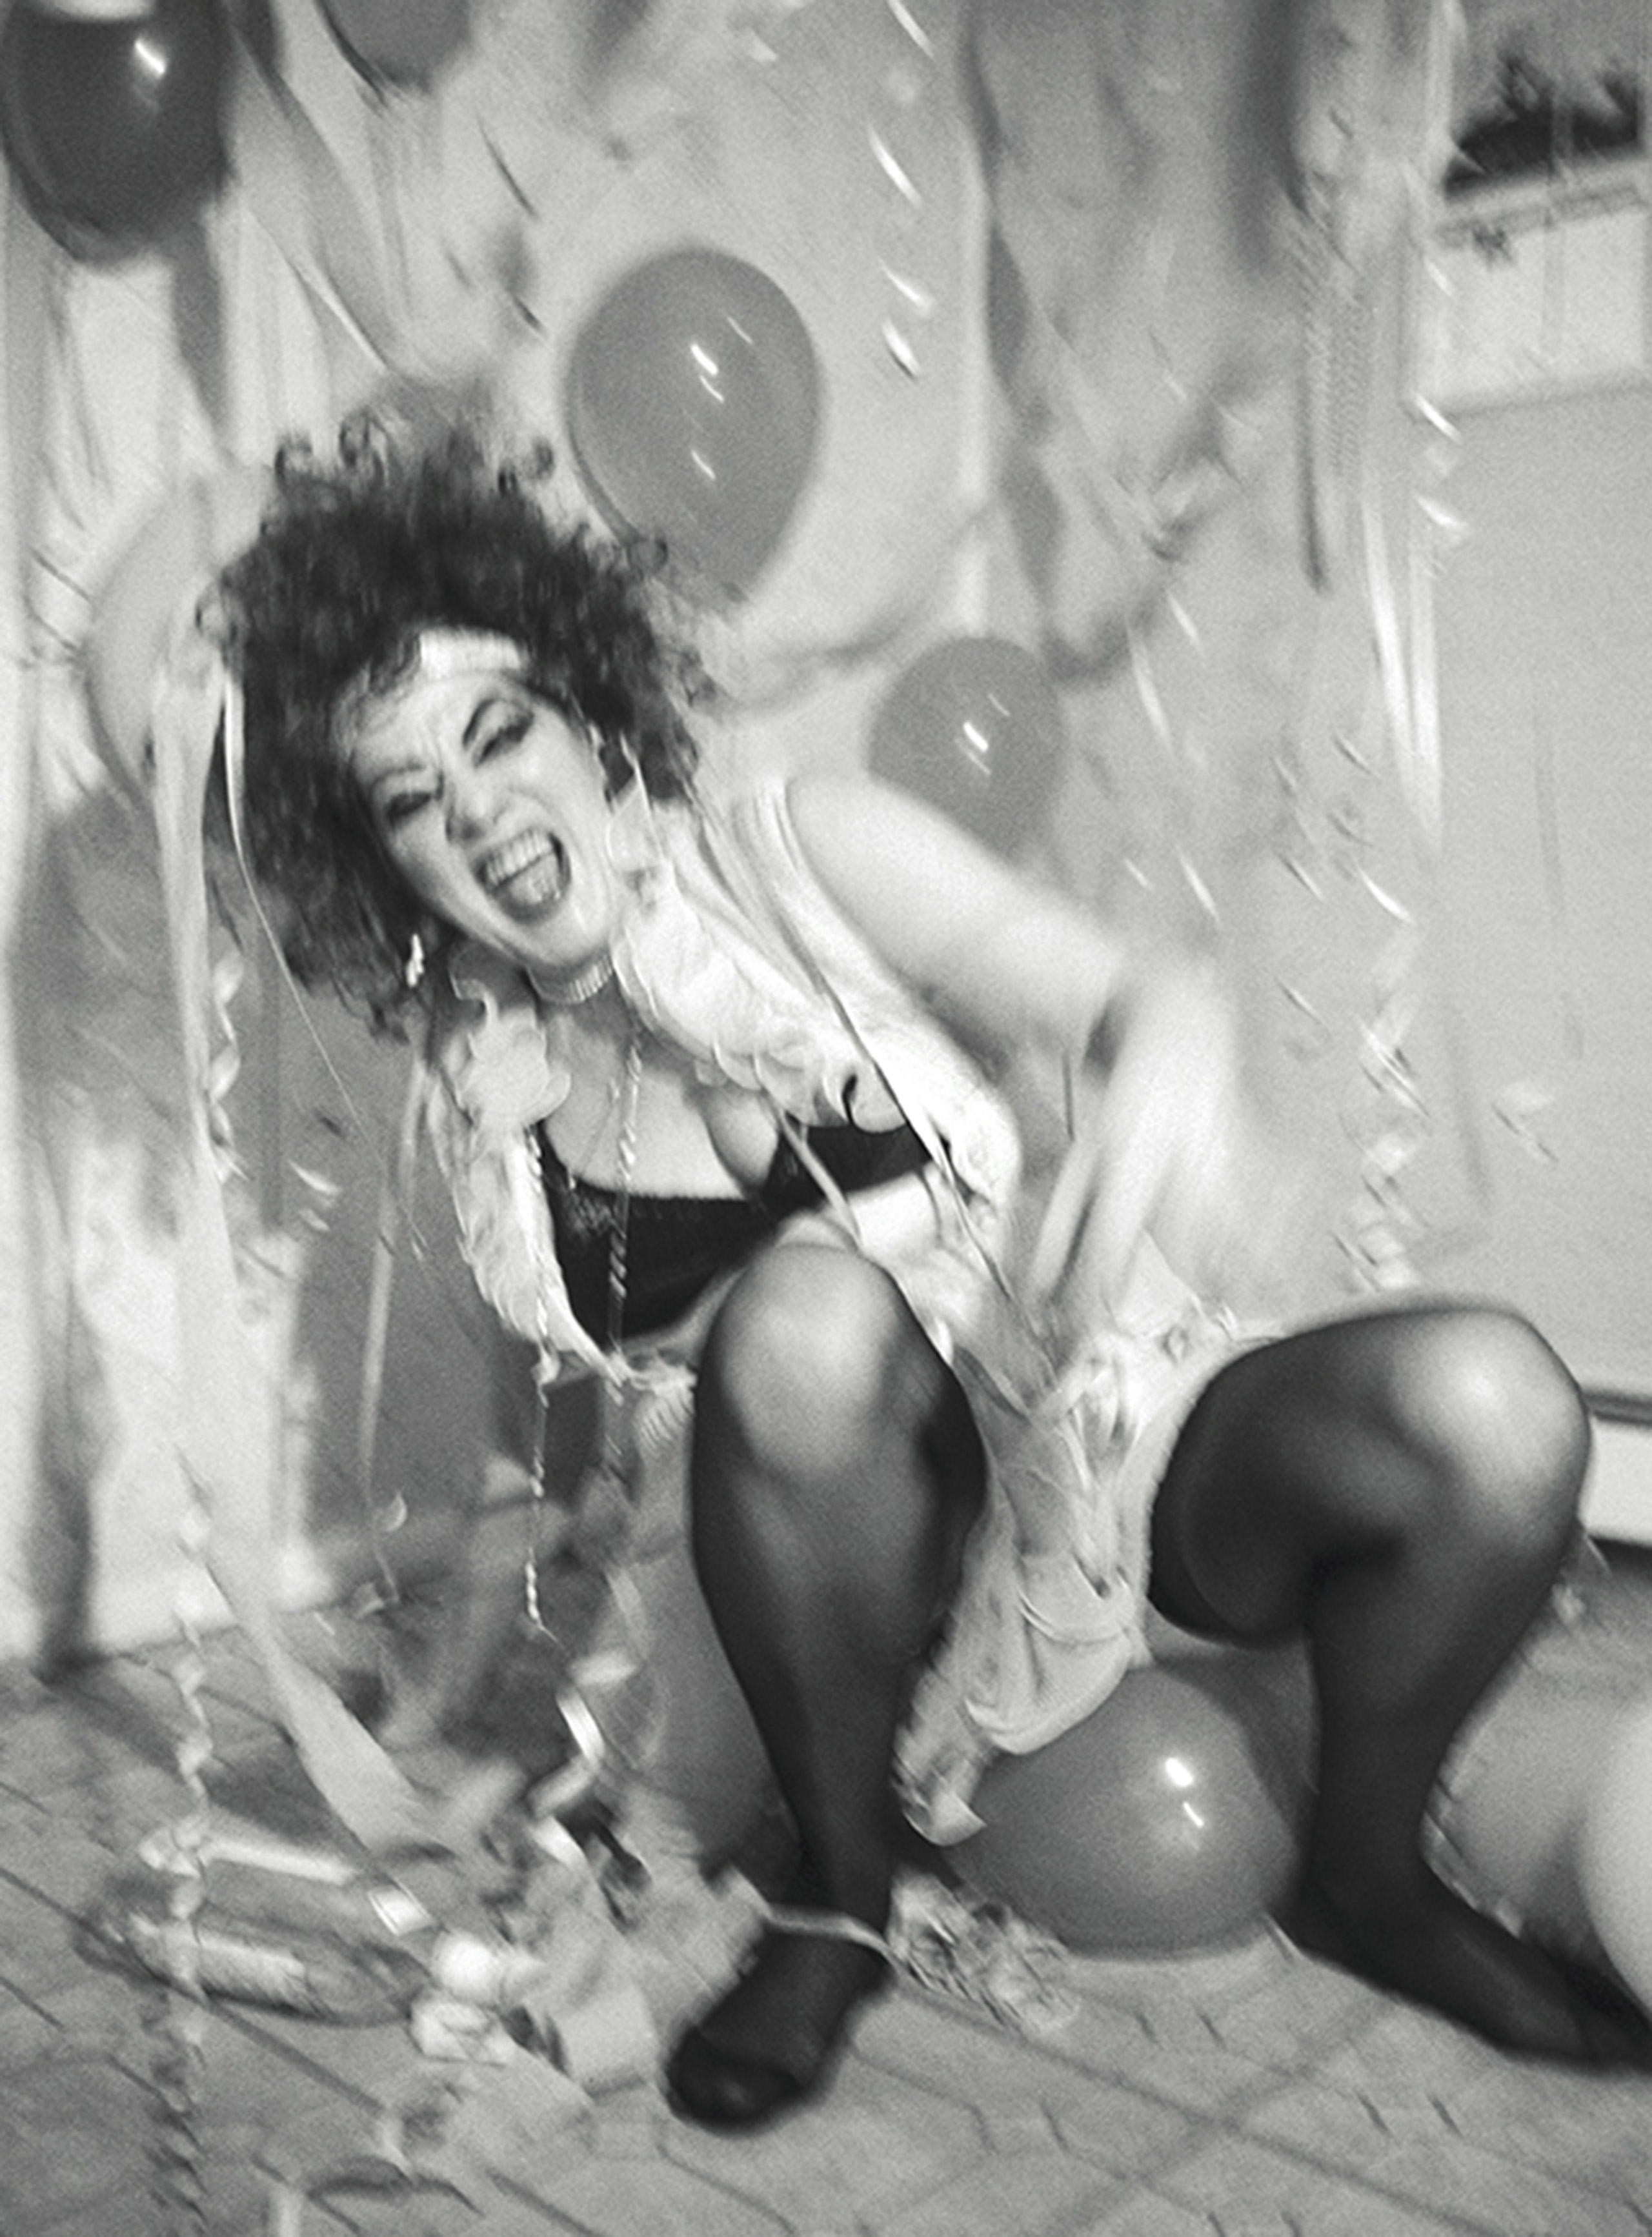 Party Girl Mommy, 1995-2000 from the series Mommy (Robert Melee—Andrew Kreps Gallery)